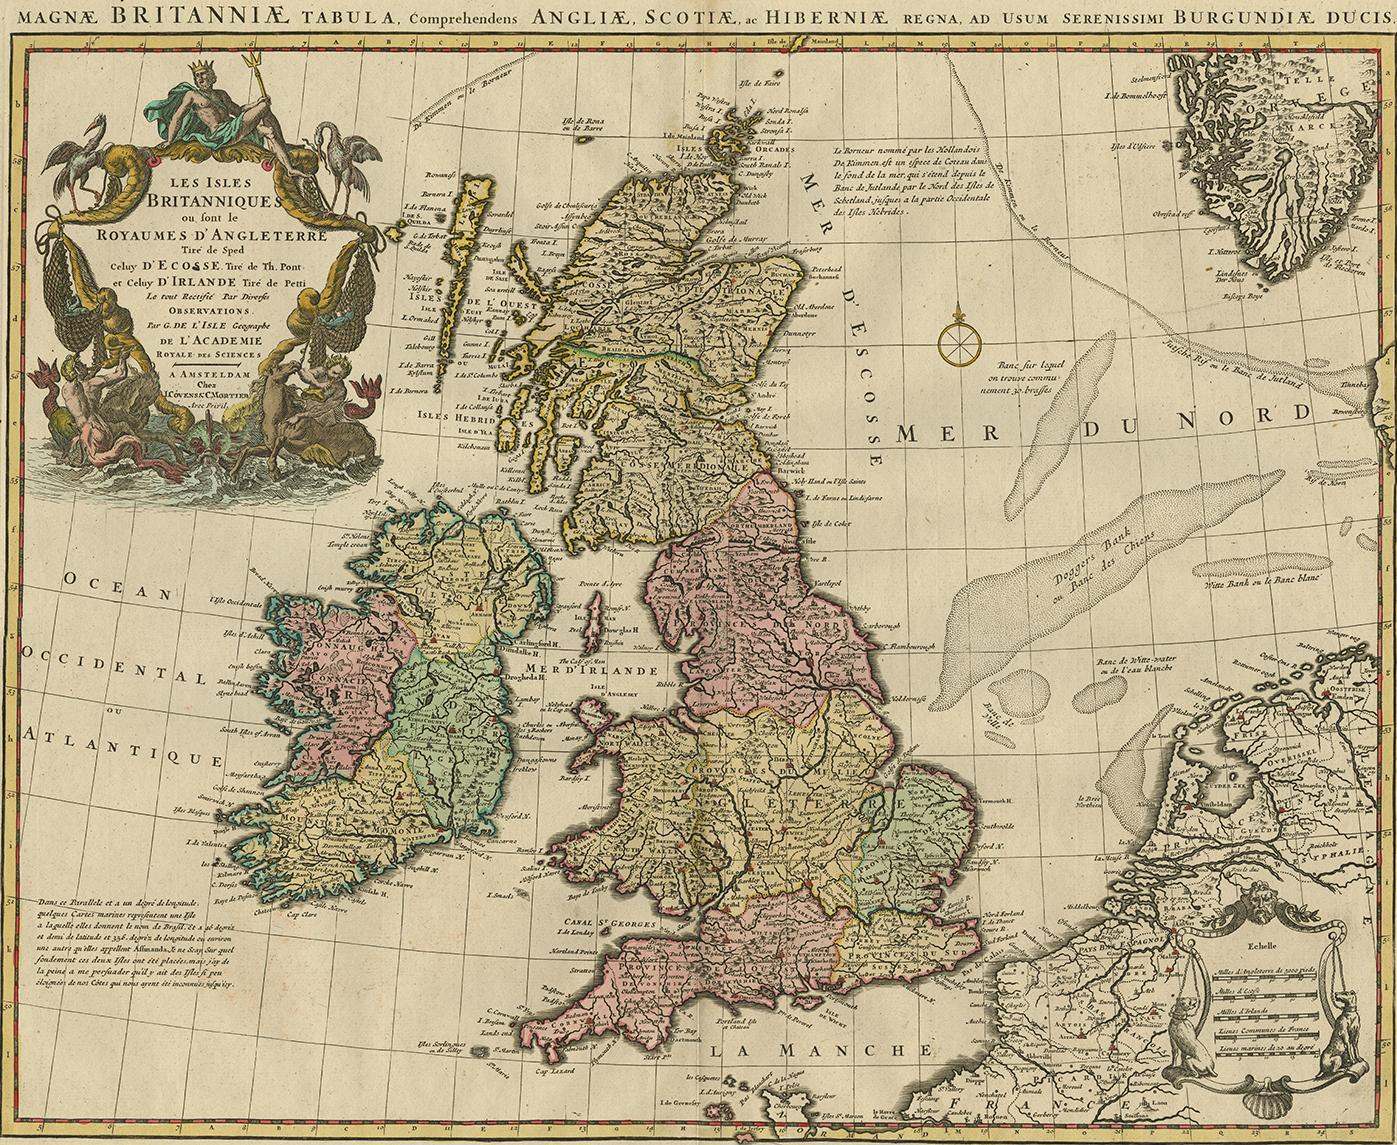 Covens and Mortier's attractive double-page engraved map of the British Isles, based on the 1702 De L'Isle map. The map features a large cartouche in the upper left comprised of numerous sea-related elements and topped by Poseidon.